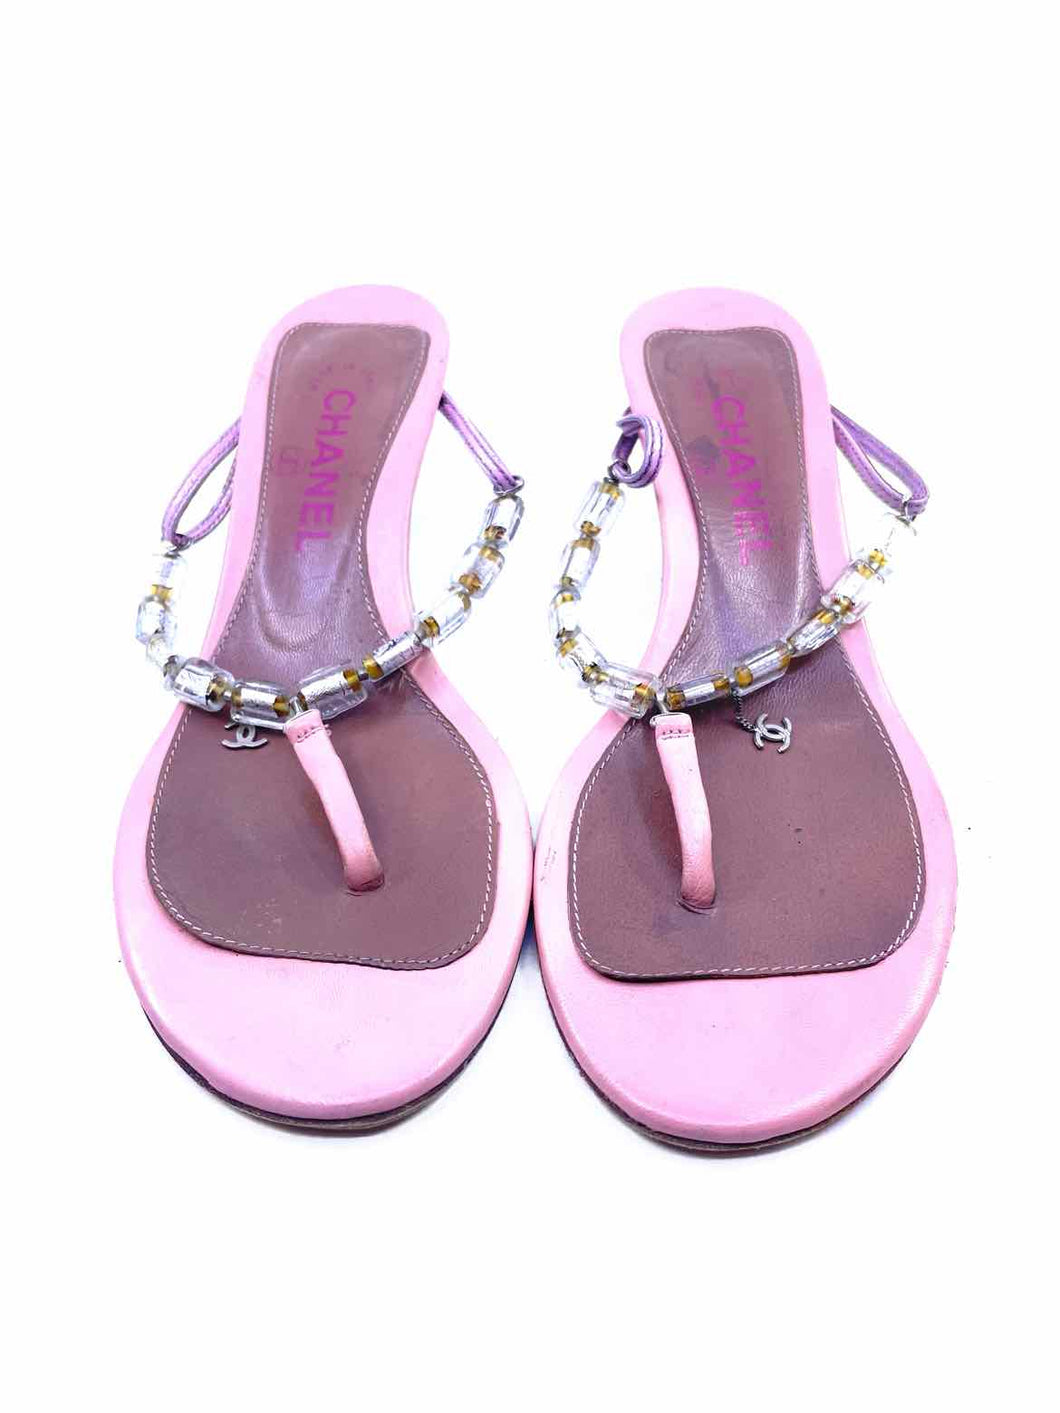 CHANEL Size 6.5 Pink Sandals